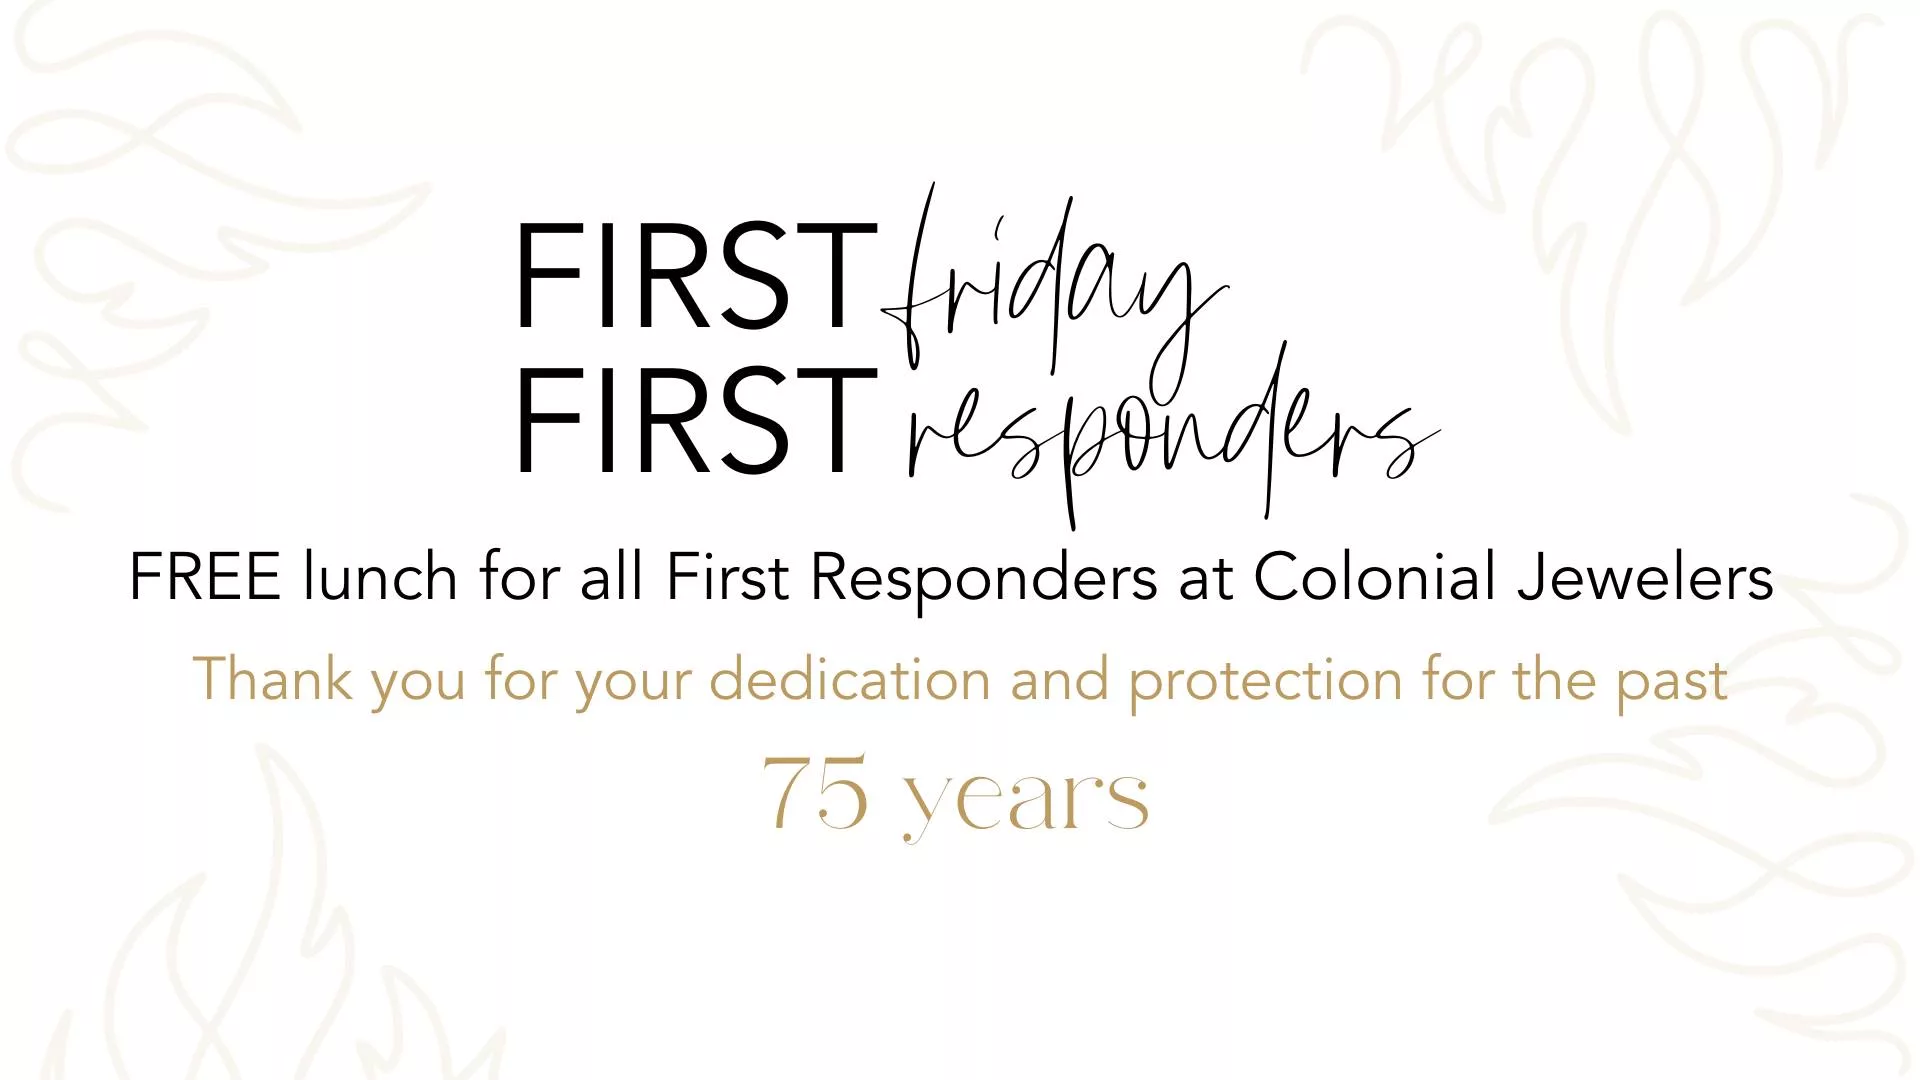 first-responder-first-fridays-at-colonial-jewelers-jpg-5